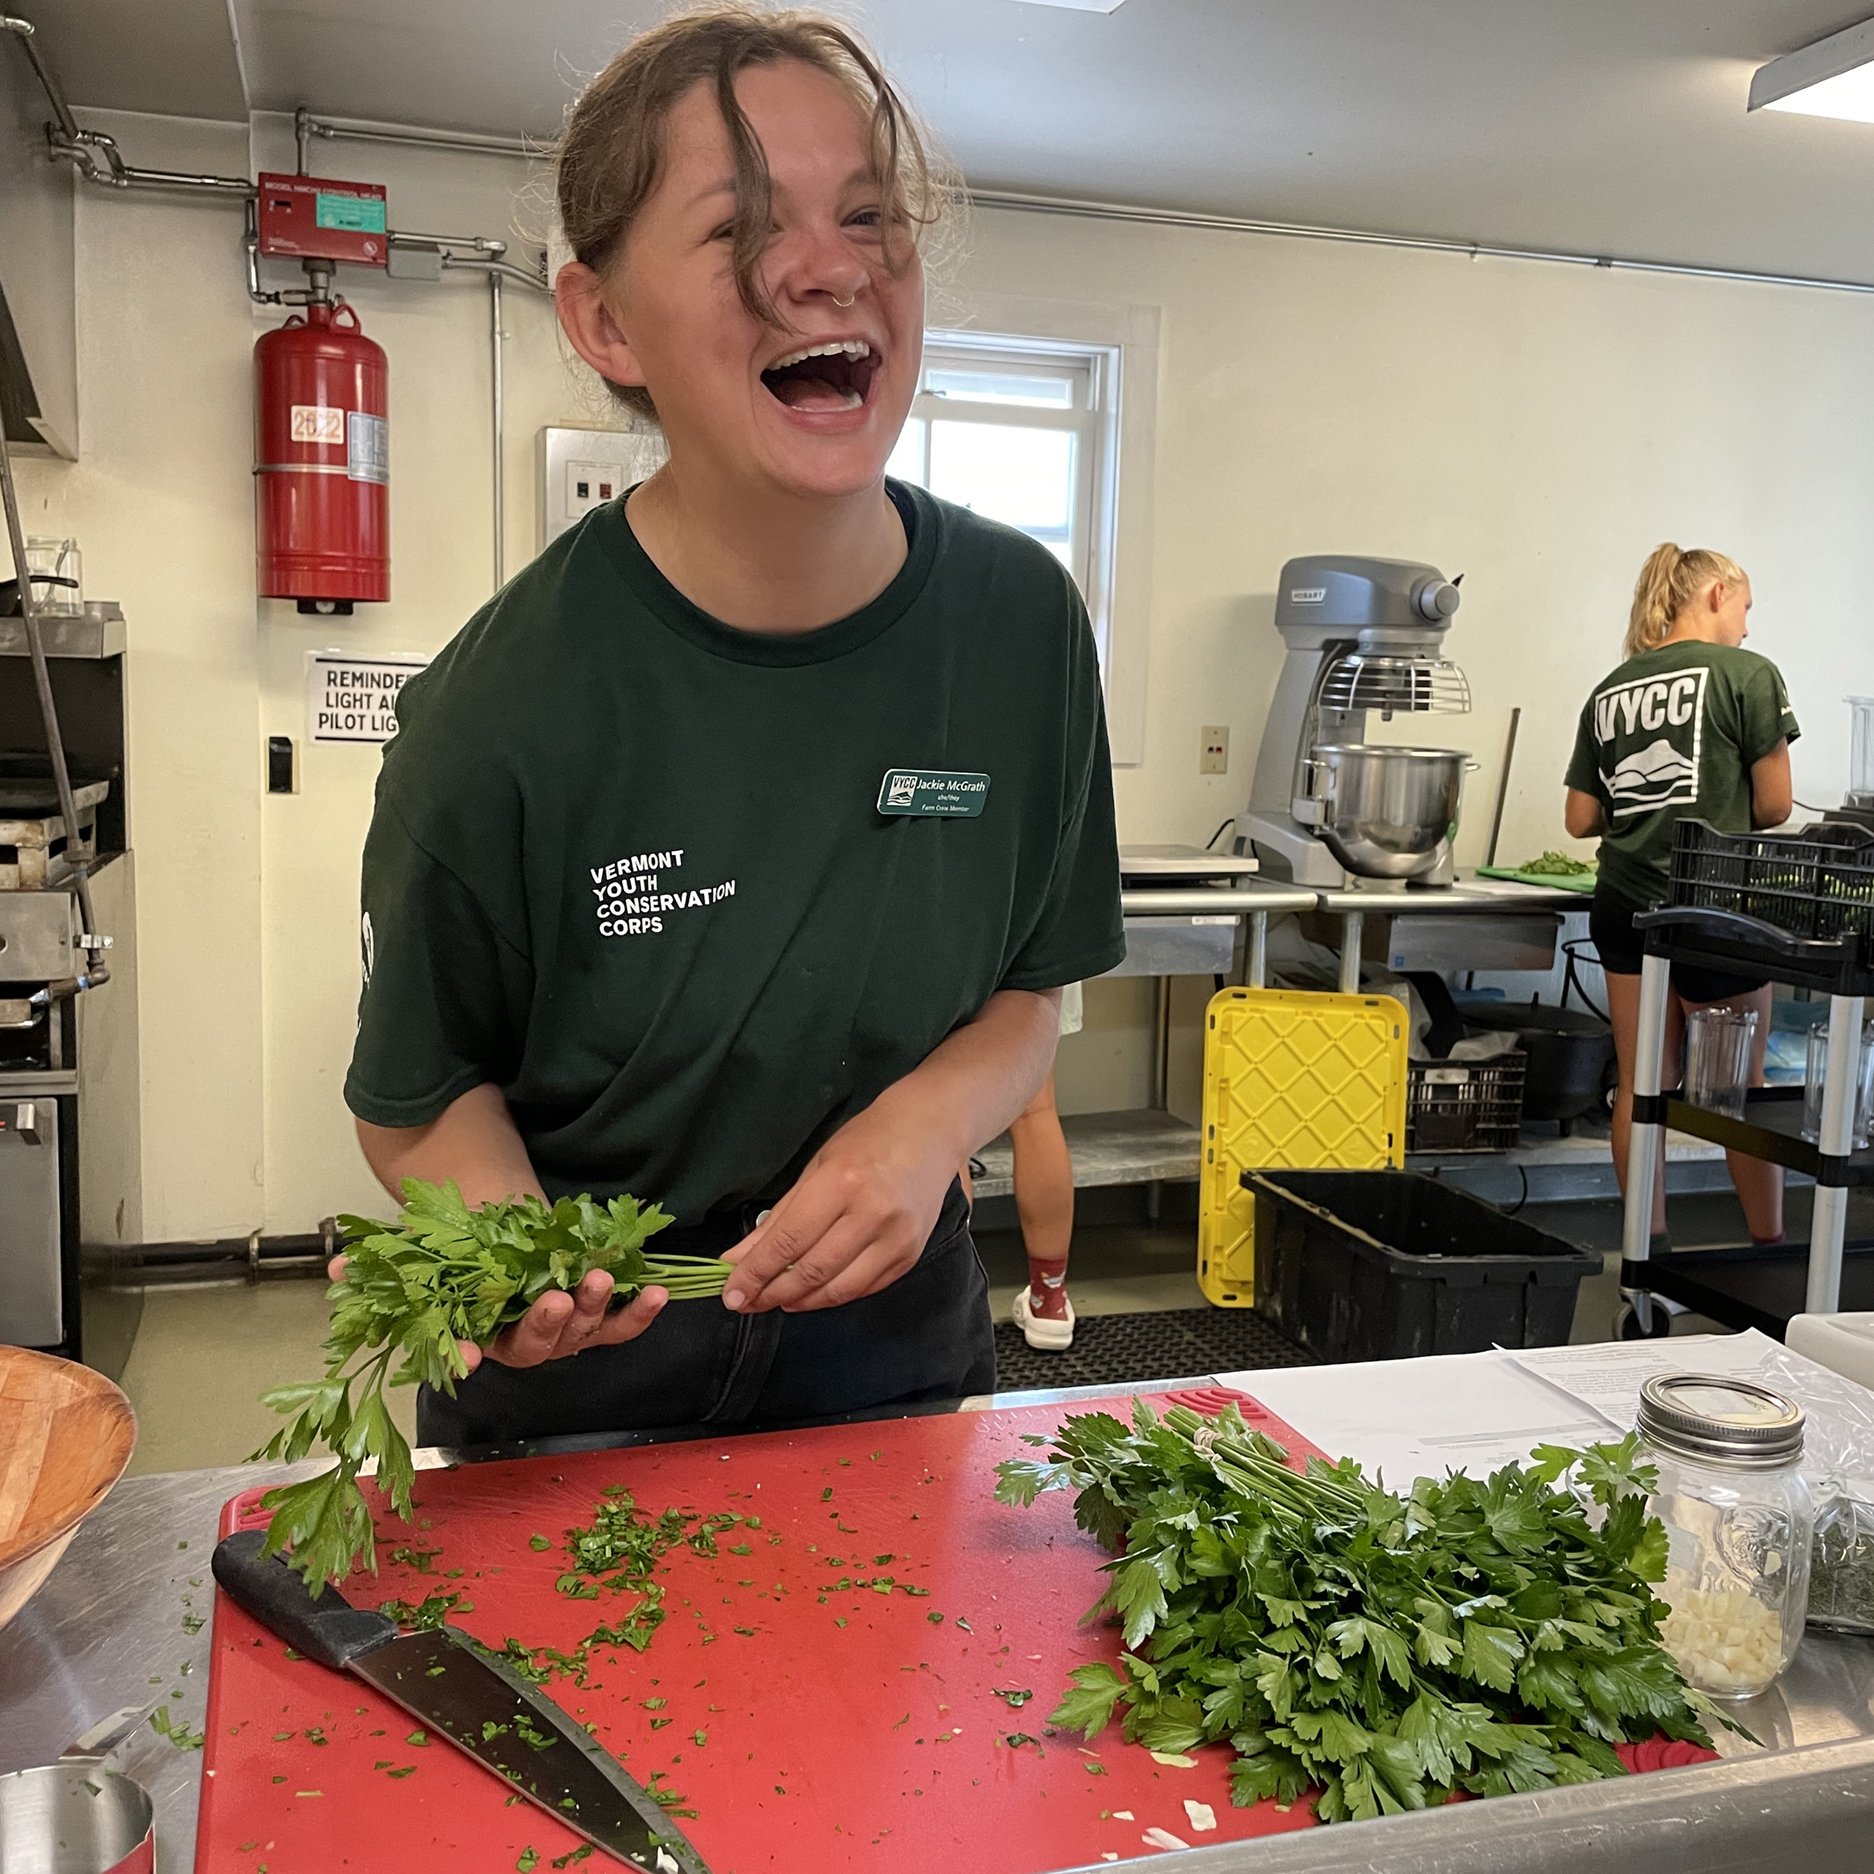 Person laughing while cutting greens in an industrial kitchen.